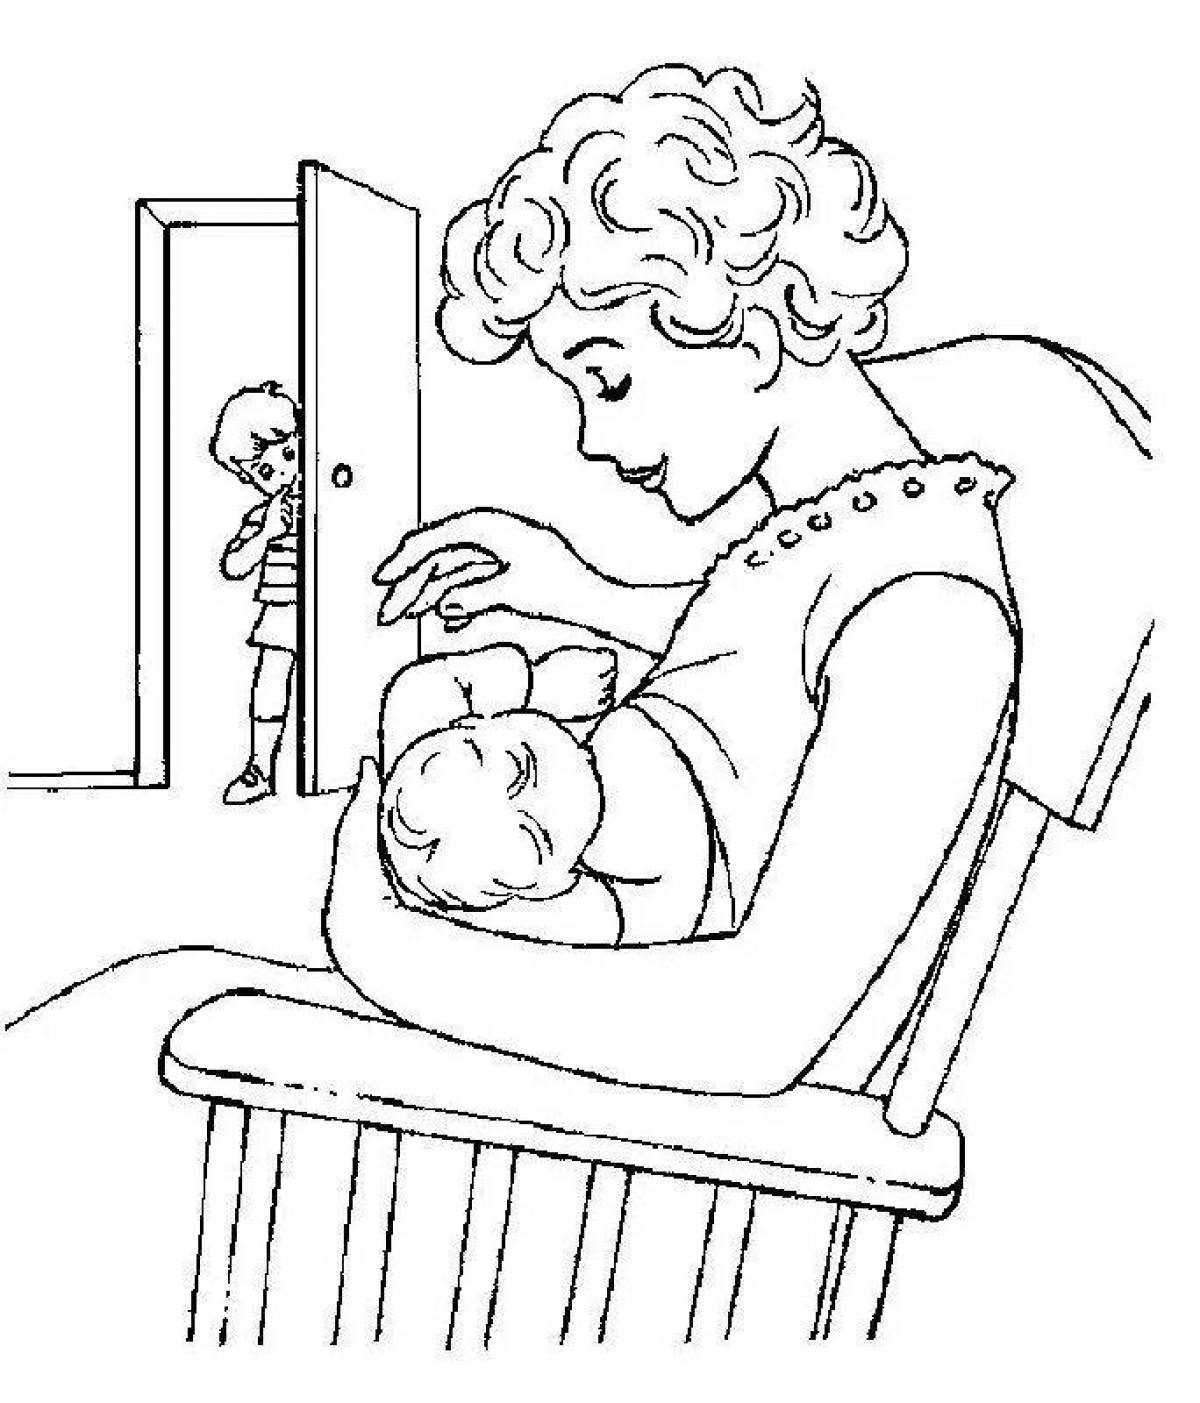 Funny mom and baby coloring book